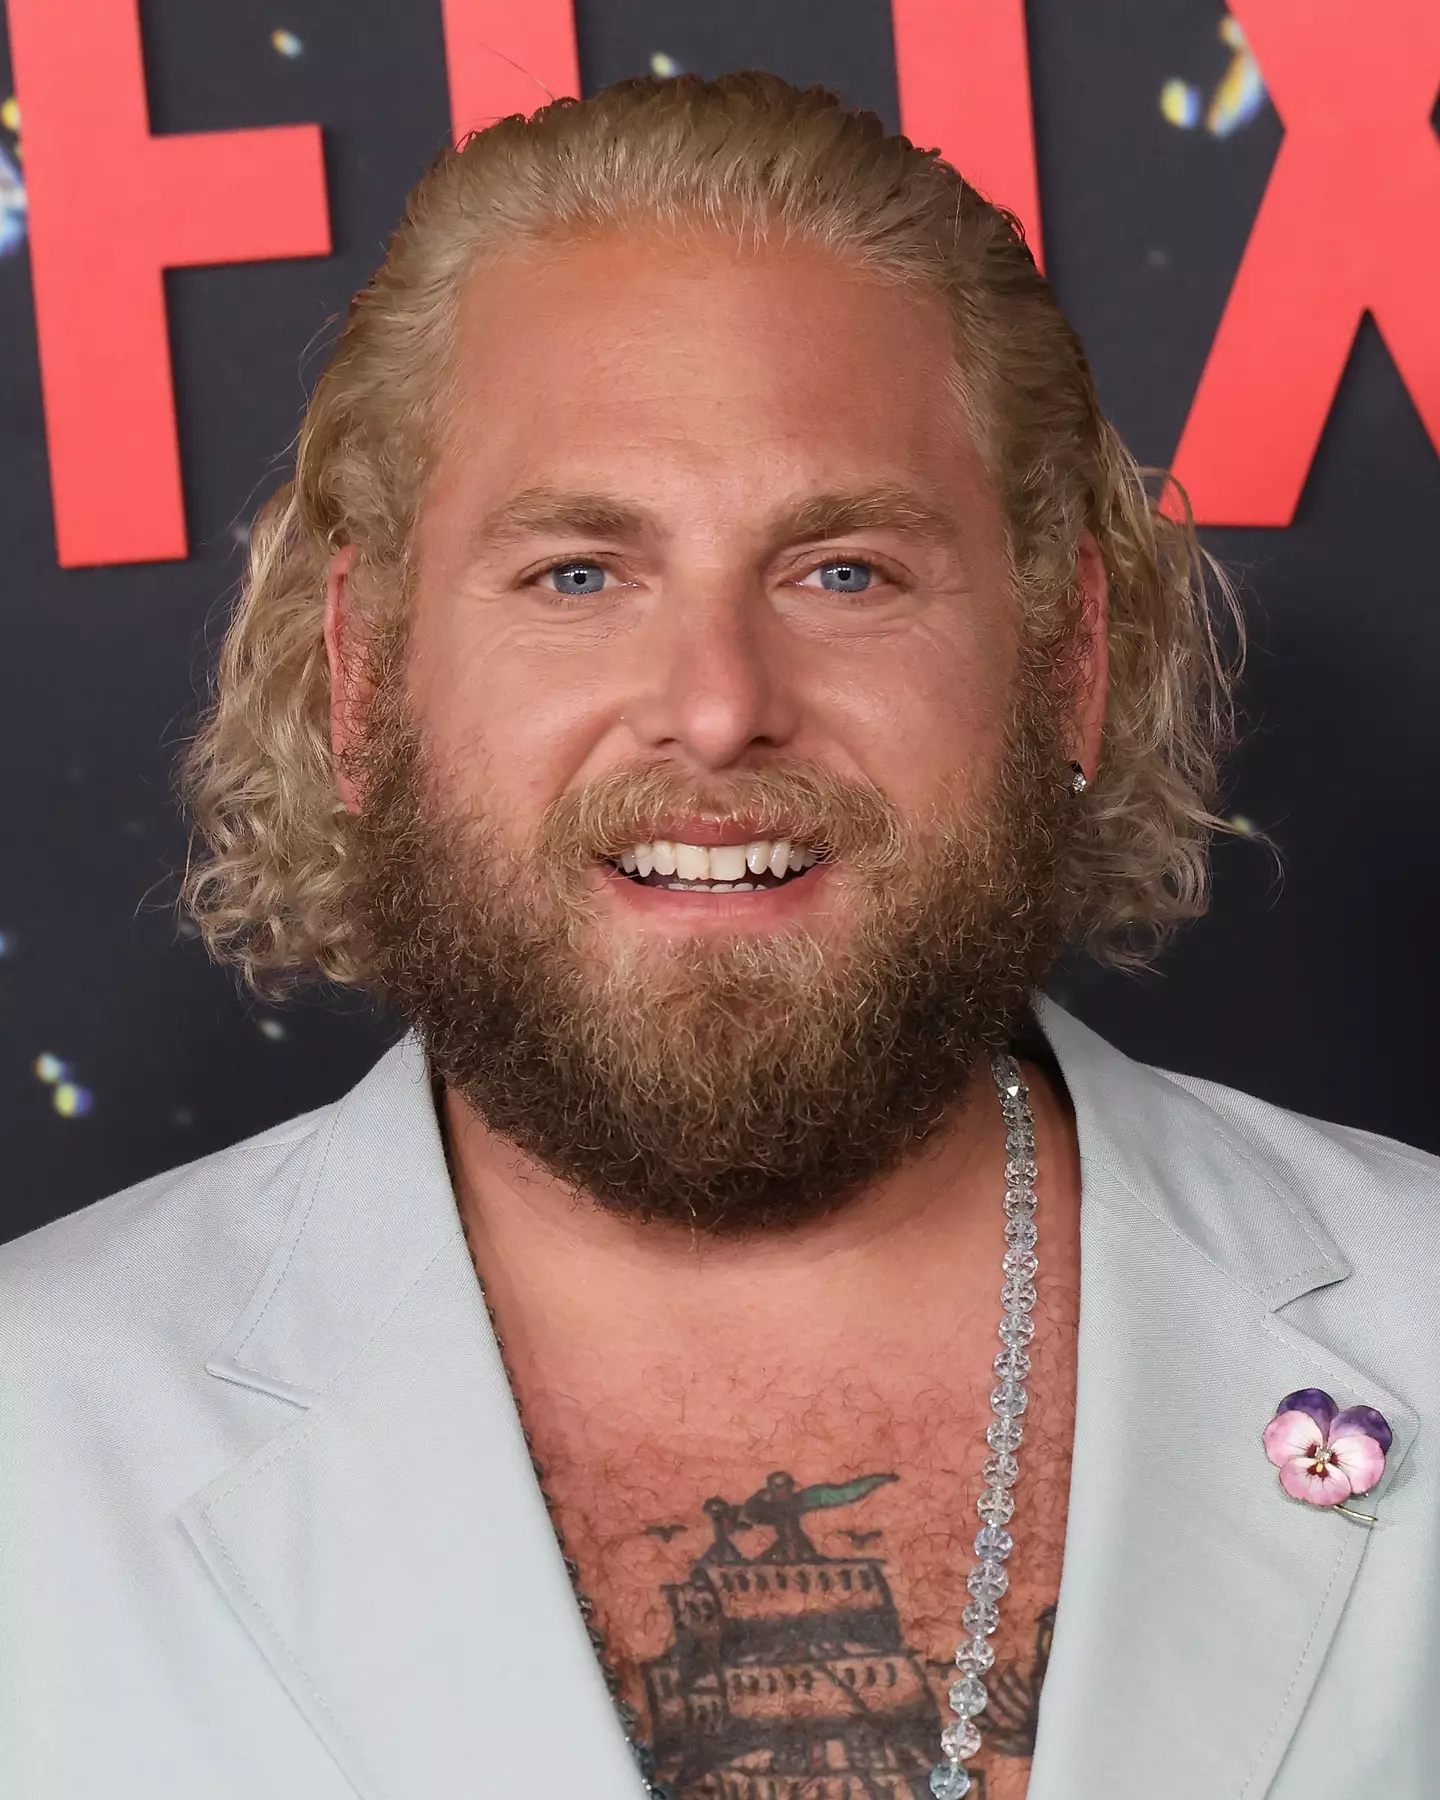 Jonah Hill stars in the movie.